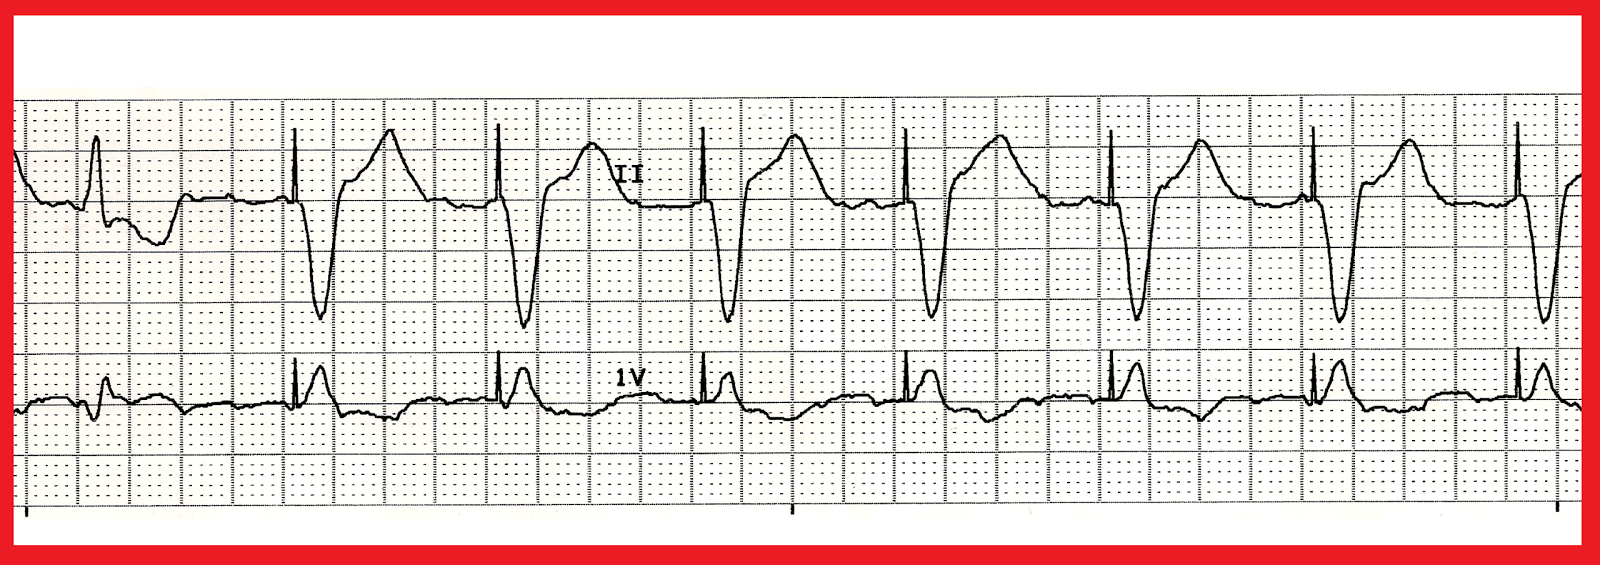 ventricular paced rhythm with failure to capture